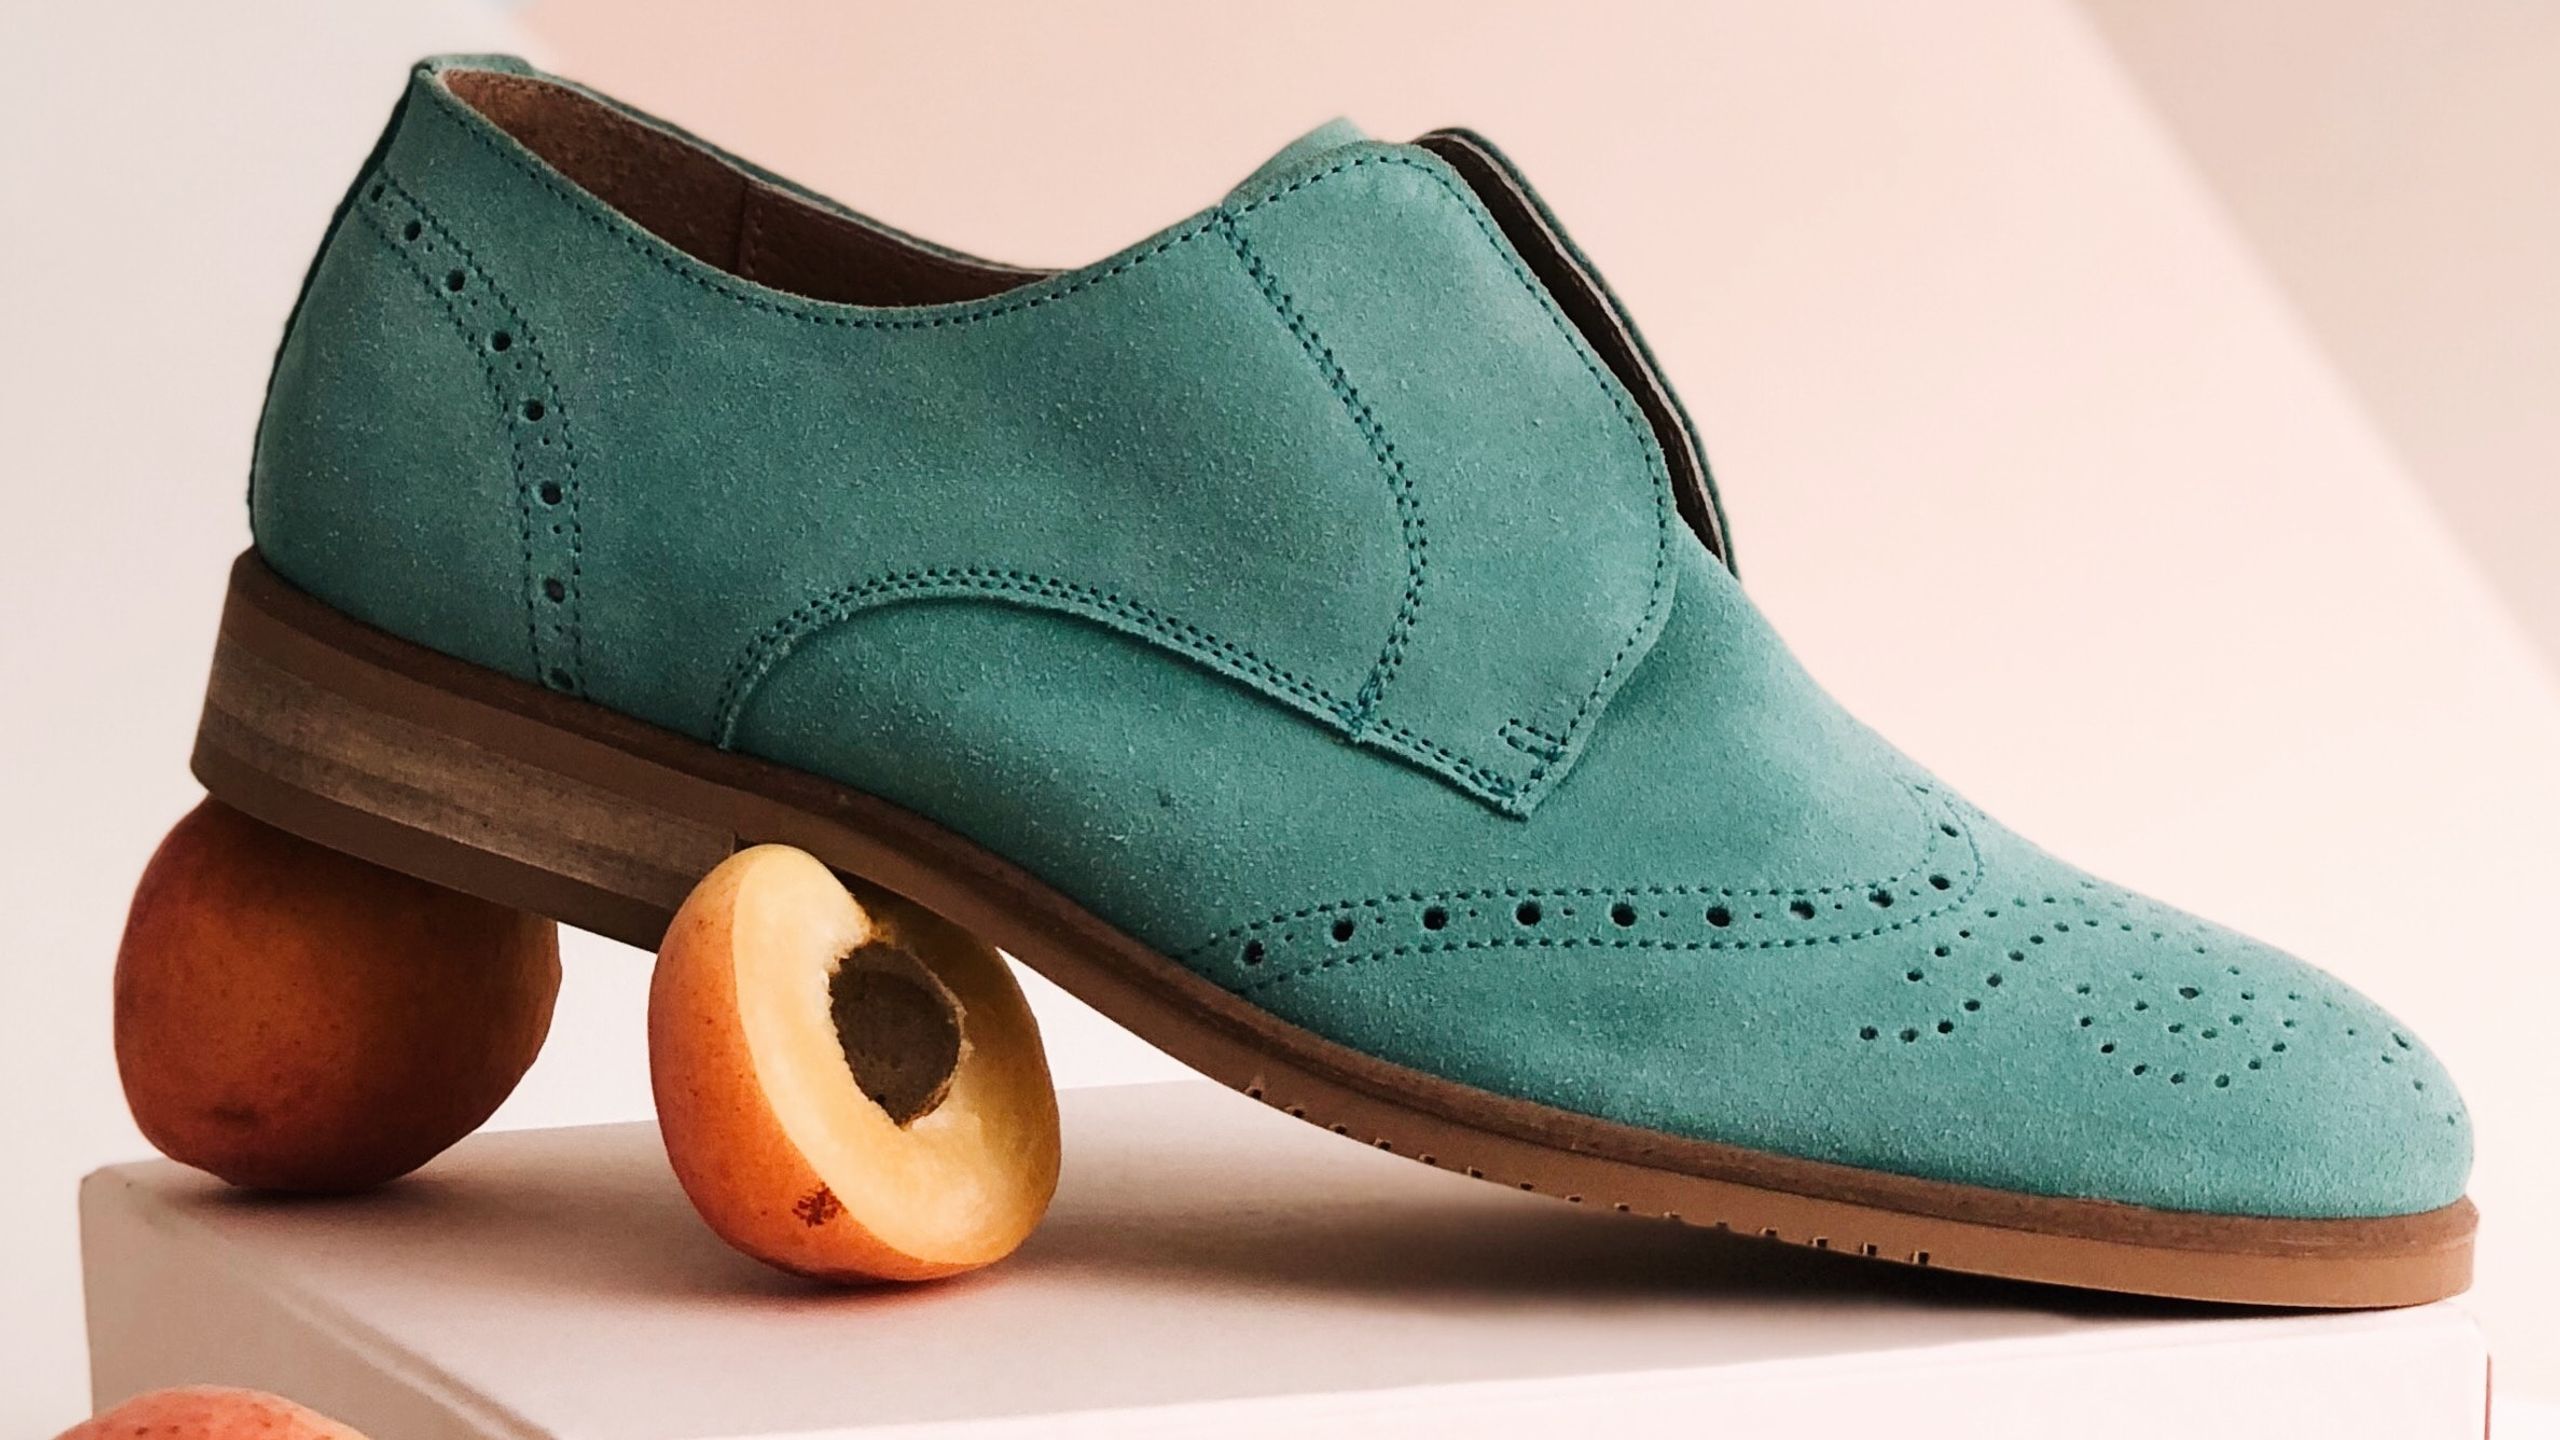 A green shoe with apricots beneath it​​​​‌﻿‍﻿​‍​‍‌‍﻿﻿‌﻿​‍‌‍‍‌‌‍‌﻿‌‍‍‌‌‍﻿‍​‍​‍​﻿‍‍​‍​‍‌﻿​﻿‌‍​‌‌‍﻿‍‌‍‍‌‌﻿‌​‌﻿‍‌​‍﻿‍‌‍‍‌‌‍﻿﻿​‍​‍​‍﻿​​‍​‍‌‍‍​‌﻿​‍‌‍‌‌‌‍‌‍​‍​‍​﻿‍‍​‍​‍‌‍‍​‌﻿‌​‌﻿‌​‌﻿​​​﻿‍‍​‍﻿﻿​‍﻿﻿‌‍﻿​‌‍﻿﻿‌‍​﻿‌‍​‌‌‍﻿​‌‍‍​‌‍﻿﻿‌﻿​﻿‌﻿‌​​﻿‍‍​﻿​﻿​﻿​﻿​﻿​﻿​﻿​﻿​‍﻿﻿‌‍‍‌‌‍﻿‍‌﻿‌​‌‍‌‌‌‍﻿‍‌﻿‌​​‍﻿﻿‌‍‌‌‌‍‌​‌‍‍‌‌﻿‌​​‍﻿﻿‌‍﻿‌‌‍﻿﻿‌‍‌​‌‍‌‌​﻿﻿‌‌﻿​​‌﻿​‍‌‍‌‌‌﻿​﻿‌‍‌‌‌‍﻿‍‌﻿‌​‌‍​‌‌﻿‌​‌‍‍‌‌‍﻿﻿‌‍﻿‍​﻿‍﻿‌‍‍‌‌‍‌​​﻿﻿‌‌‍​‍​﻿‍‌​﻿‌‌​﻿‌‍‌‍​﻿‌‍‌‍​﻿‌﻿‌‍​‍​‍﻿‌‌‍​‌​﻿‌﻿‌‍​‍​﻿‌﻿​‍﻿‌​﻿‌​‌‍‌‌​﻿‌‌​﻿‌‍​‍﻿‌‌‍​‌​﻿​‌​﻿‌‍‌‍‌‍​‍﻿‌‌‍​‍‌‍​‌‌‍‌​​﻿‍​‌‍‌‌‌‍‌‌​﻿​﻿​﻿‍‌​﻿​‍‌‍‌‌​﻿​﻿​﻿‌​​﻿‍﻿‌﻿‌​‌﻿‍‌‌﻿​​‌‍‌‌​﻿﻿‌‌﻿​﻿‌‍‍​‌‍﻿﻿‌‍‌‌​﻿‍﻿‌﻿​​‌‍​‌‌﻿‌​‌‍‍​​﻿﻿‌‌‍﻿‌‌‍‌‌‌‍‌​‌‍‍‌‌‍​‌​‍‌‌​﻿‌‌‌​​‍‌‌﻿﻿‌‍‍﻿‌‍‌‌‌﻿‍‌​‍‌‌​﻿​﻿‌​‌​​‍‌‌​﻿​﻿‌​‌​​‍‌‌​﻿​‍​﻿​‍​﻿‌‍​﻿​​​﻿​​‌‍​﻿‌‍‌‌​﻿​​​﻿​‍‌‍​‌‌‍​﻿‌‍​‌​﻿‍‌​﻿‌‌​‍‌‌​﻿​‍​﻿​‍​‍‌‌​﻿‌‌‌​‌​​‍﻿‍‌‍​‌‌‍﻿​‌﻿‌​​﻿﻿﻿‌‍​‍‌‍​‌‌﻿​﻿‌‍‌‌‌‌‌‌‌﻿​‍‌‍﻿​​﻿﻿‌‌‍‍​‌﻿‌​‌﻿‌​‌﻿​​​‍‌‌​﻿​﻿‌​​‌​‍‌‌​﻿​‍‌​‌‍​‍‌‌​﻿​‍‌​‌‍‌‍﻿​‌‍﻿﻿‌‍​﻿‌‍​‌‌‍﻿​‌‍‍​‌‍﻿﻿‌﻿​﻿‌﻿‌​​‍‌‌​﻿​﻿‌​​‌​﻿​﻿​﻿​﻿​﻿​﻿​﻿​﻿​‍‌‍‌‍‍‌‌‍‌​​﻿﻿‌‌‍​‍​﻿‍‌​﻿‌‌​﻿‌‍‌‍​﻿‌‍‌‍​﻿‌﻿‌‍​‍​‍﻿‌‌‍​‌​﻿‌﻿‌‍​‍​﻿‌﻿​‍﻿‌​﻿‌​‌‍‌‌​﻿‌‌​﻿‌‍​‍﻿‌‌‍​‌​﻿​‌​﻿‌‍‌‍‌‍​‍﻿‌‌‍​‍‌‍​‌‌‍‌​​﻿‍​‌‍‌‌‌‍‌‌​﻿​﻿​﻿‍‌​﻿​‍‌‍‌‌​﻿​﻿​﻿‌​​‍‌‍‌﻿‌​‌﻿‍‌‌﻿​​‌‍‌‌​﻿﻿‌‌﻿​﻿‌‍‍​‌‍﻿﻿‌‍‌‌​‍‌‍‌﻿​​‌‍​‌‌﻿‌​‌‍‍​​﻿﻿‌‌‍﻿‌‌‍‌‌‌‍‌​‌‍‍‌‌‍​‌​‍‌‌​﻿‌‌‌​​‍‌‌﻿﻿‌‍‍﻿‌‍‌‌‌﻿‍‌​‍‌‌​﻿​﻿‌​‌​​‍‌‌​﻿​﻿‌​‌​​‍‌‌​﻿​‍​﻿​‍​﻿‌‍​﻿​​​﻿​​‌‍​﻿‌‍‌‌​﻿​​​﻿​‍‌‍​‌‌‍​﻿‌‍​‌​﻿‍‌​﻿‌‌​‍‌‌​﻿​‍​﻿​‍​‍‌‌​﻿‌‌‌​‌​​‍﻿‍‌‍​‌‌‍﻿​‌﻿‌​​‍​‍‌﻿﻿‌